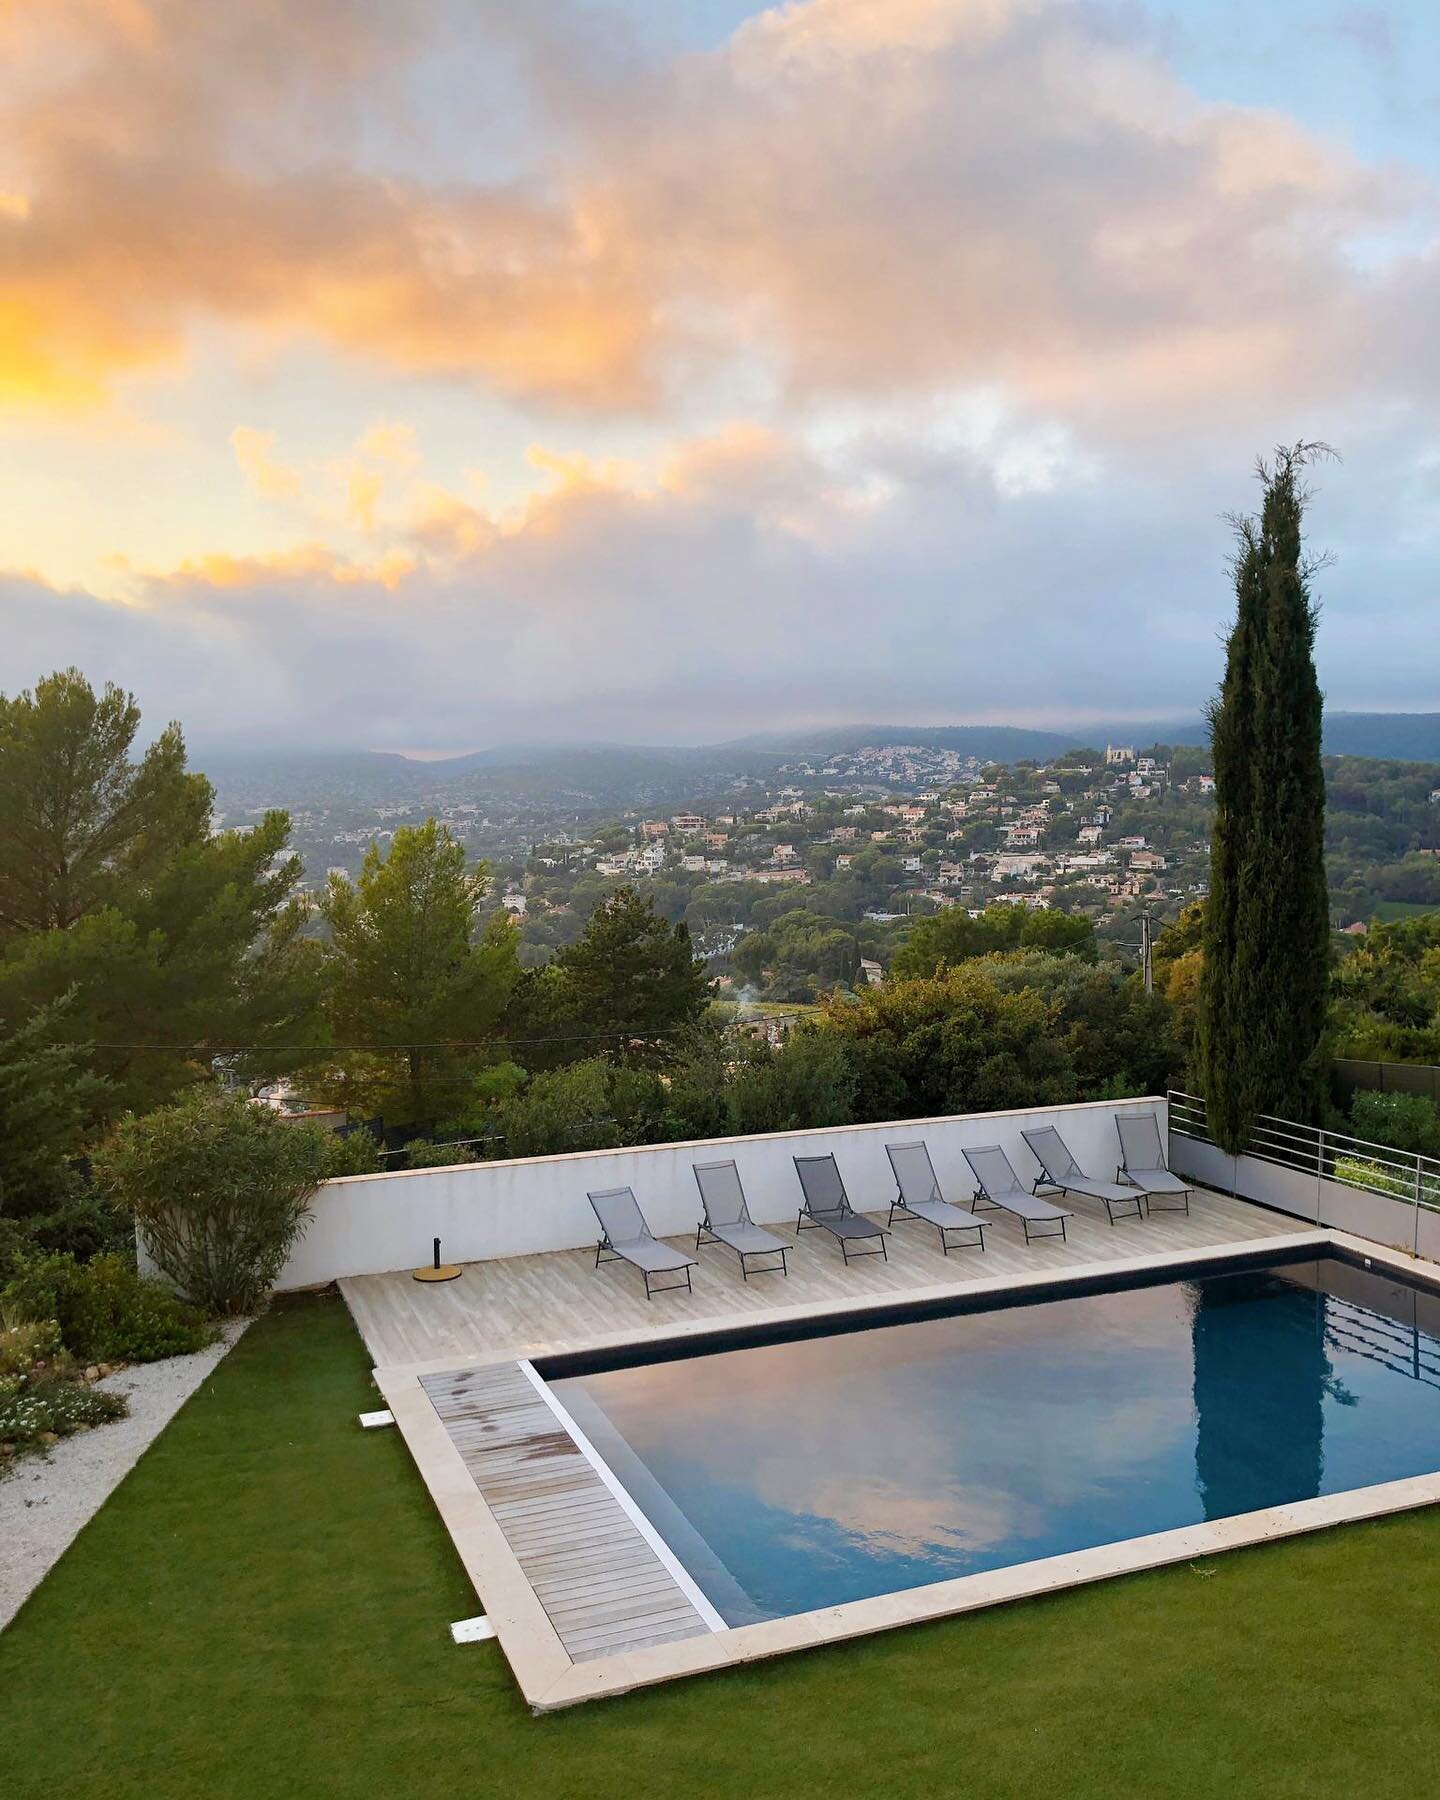 Welcome Reboot retreat, happening now at our gorgeous Villa Dadou. The villas welcome retreats, corporate events and seminars all year round. 🧡 @wellinfrance @petit_yoga